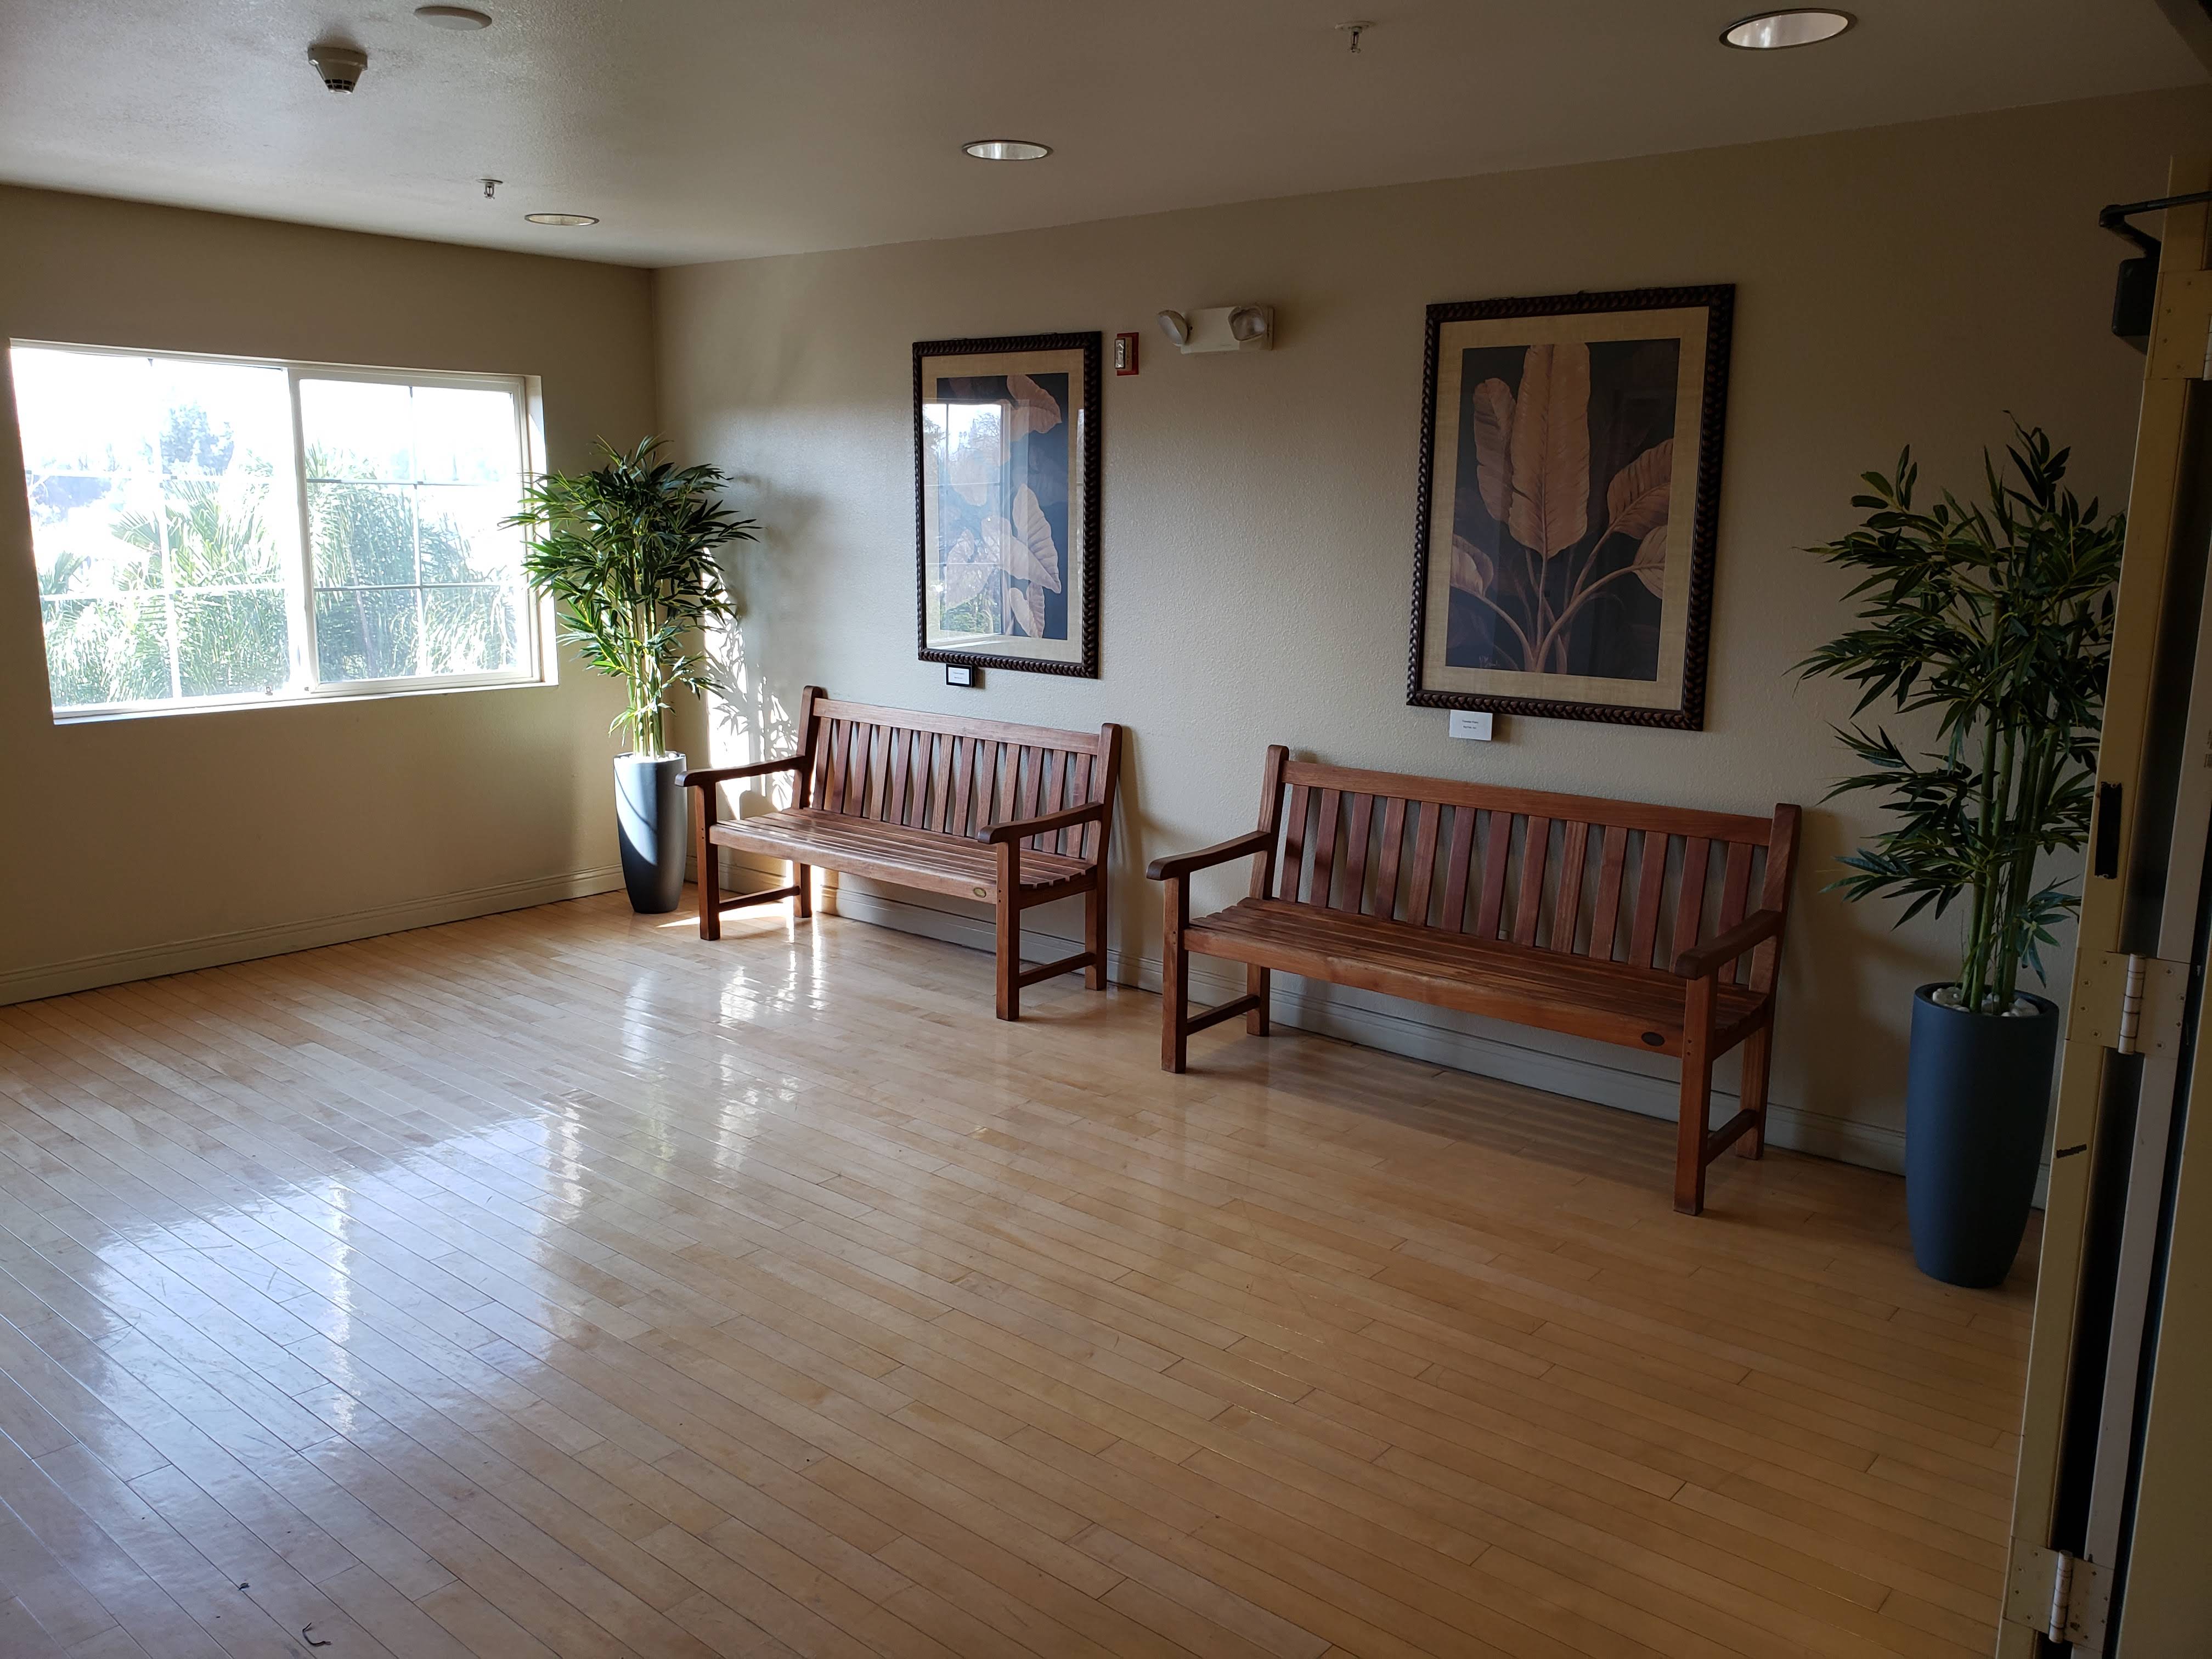 Image of a room in vintage crossing senior apartments. Large room with light brown hardwood flooring. two benches along wall. two large decroative photos over seating area. two large plants. large window that brings in plenty of natural lighting. recessed